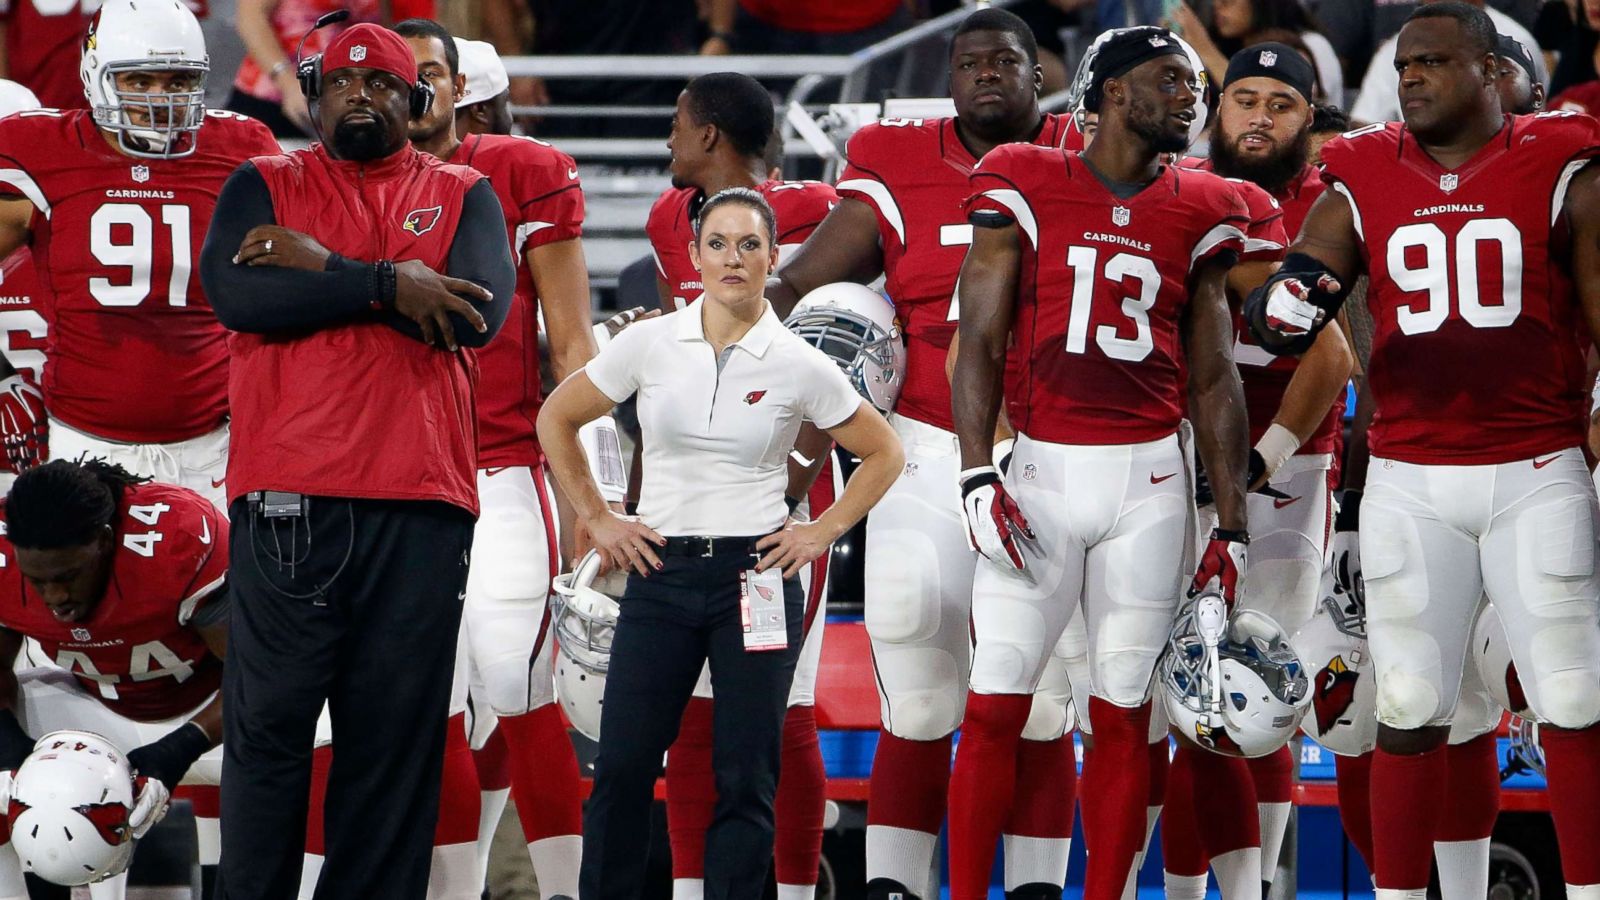 The NFL's First Female Coach - Jen Welter on Being Limitless and